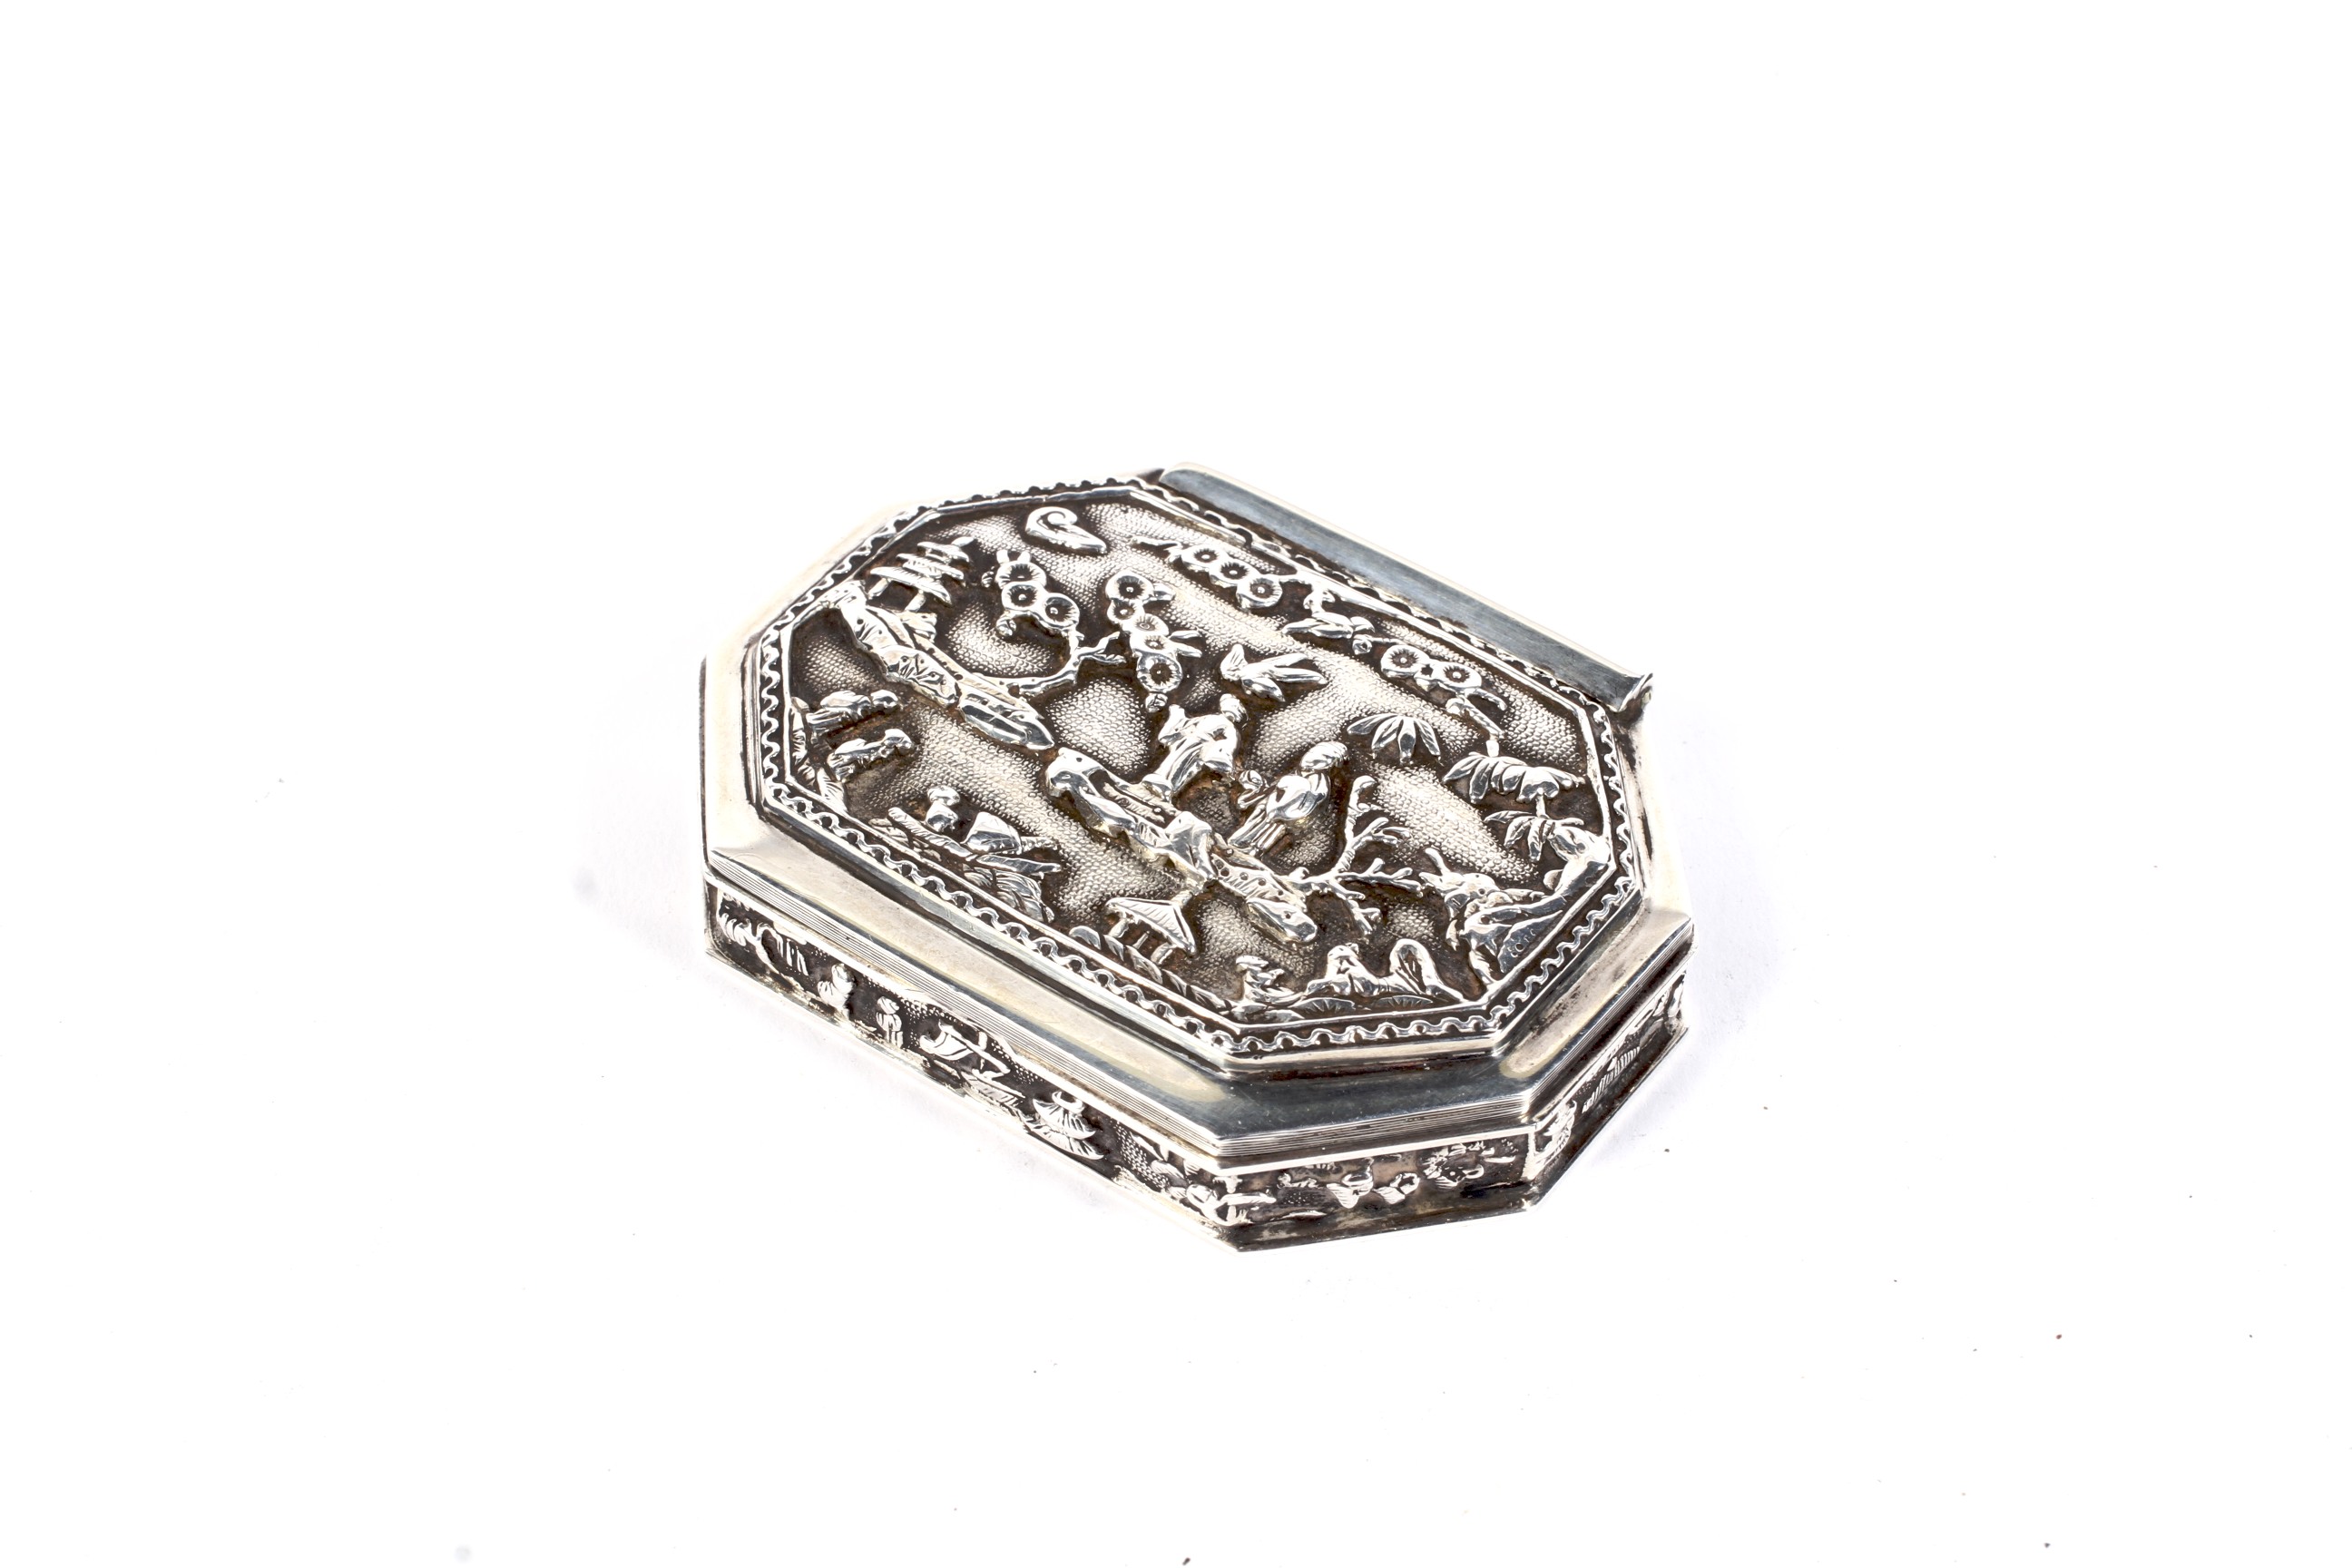 A modern silver limited edition octagonal snuff box after the antique.